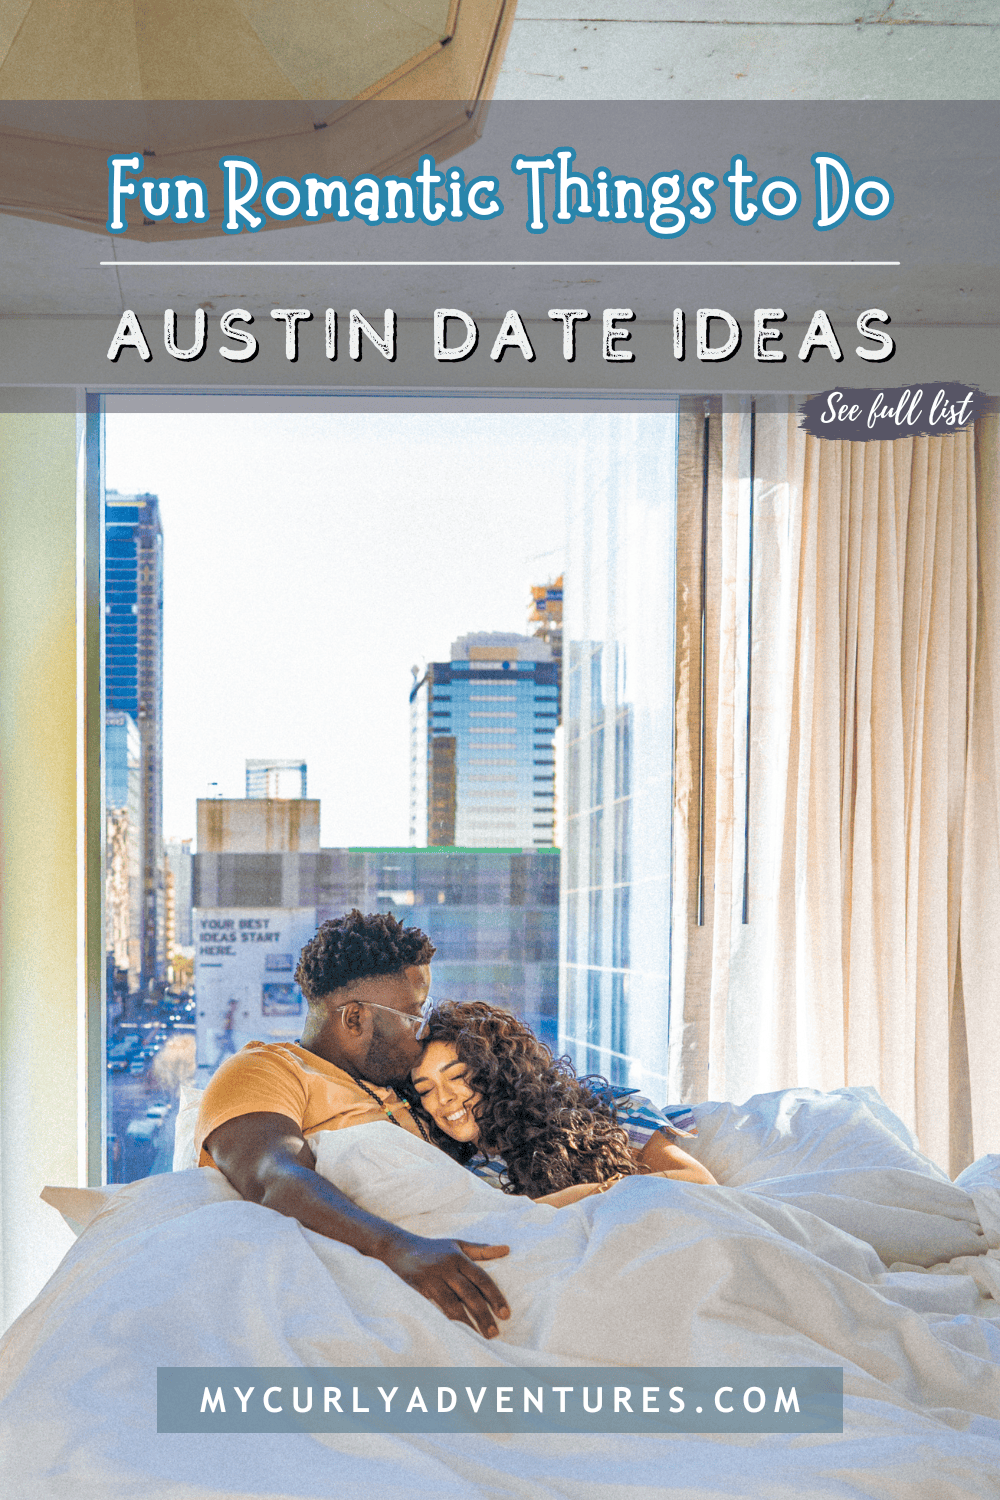 Best Date Ideas: Fun Romantic Things to Do in Austin